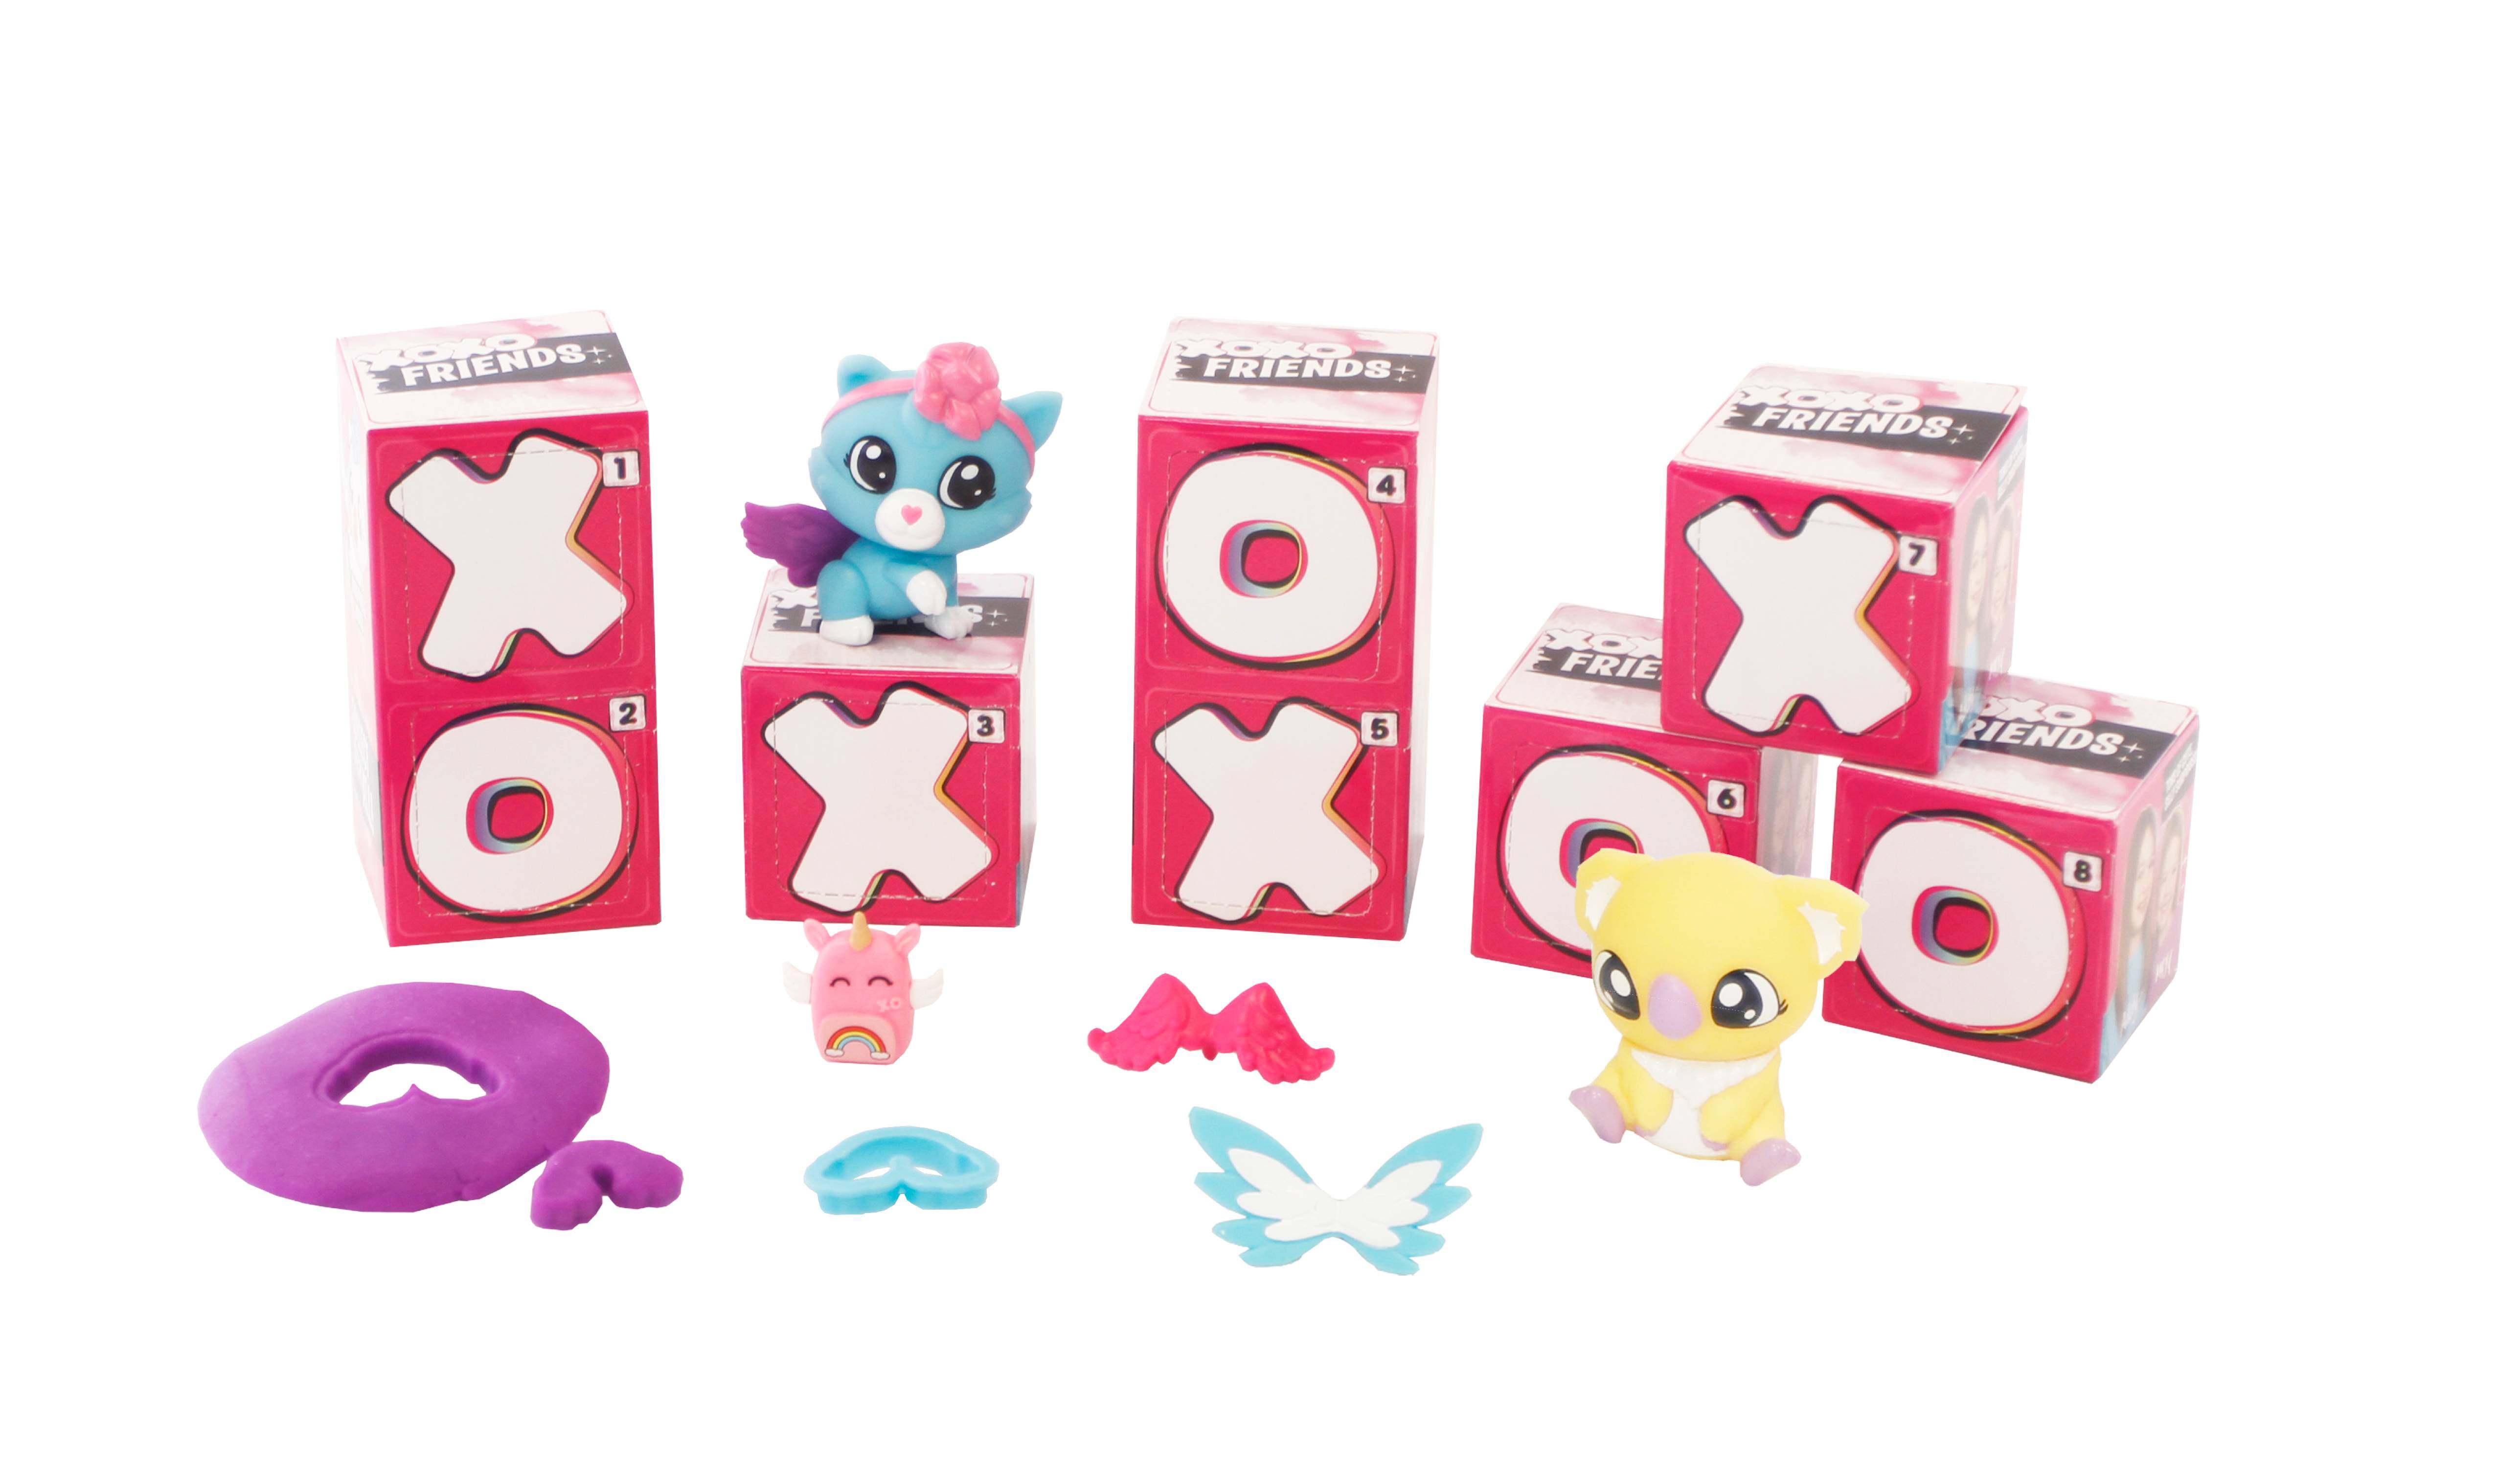 TIC TAC TOY XOXO Cupcake Surprise | Mix & Match Fun and Cute Collectibles  and Accessories | Great Toy & Gift for Girls